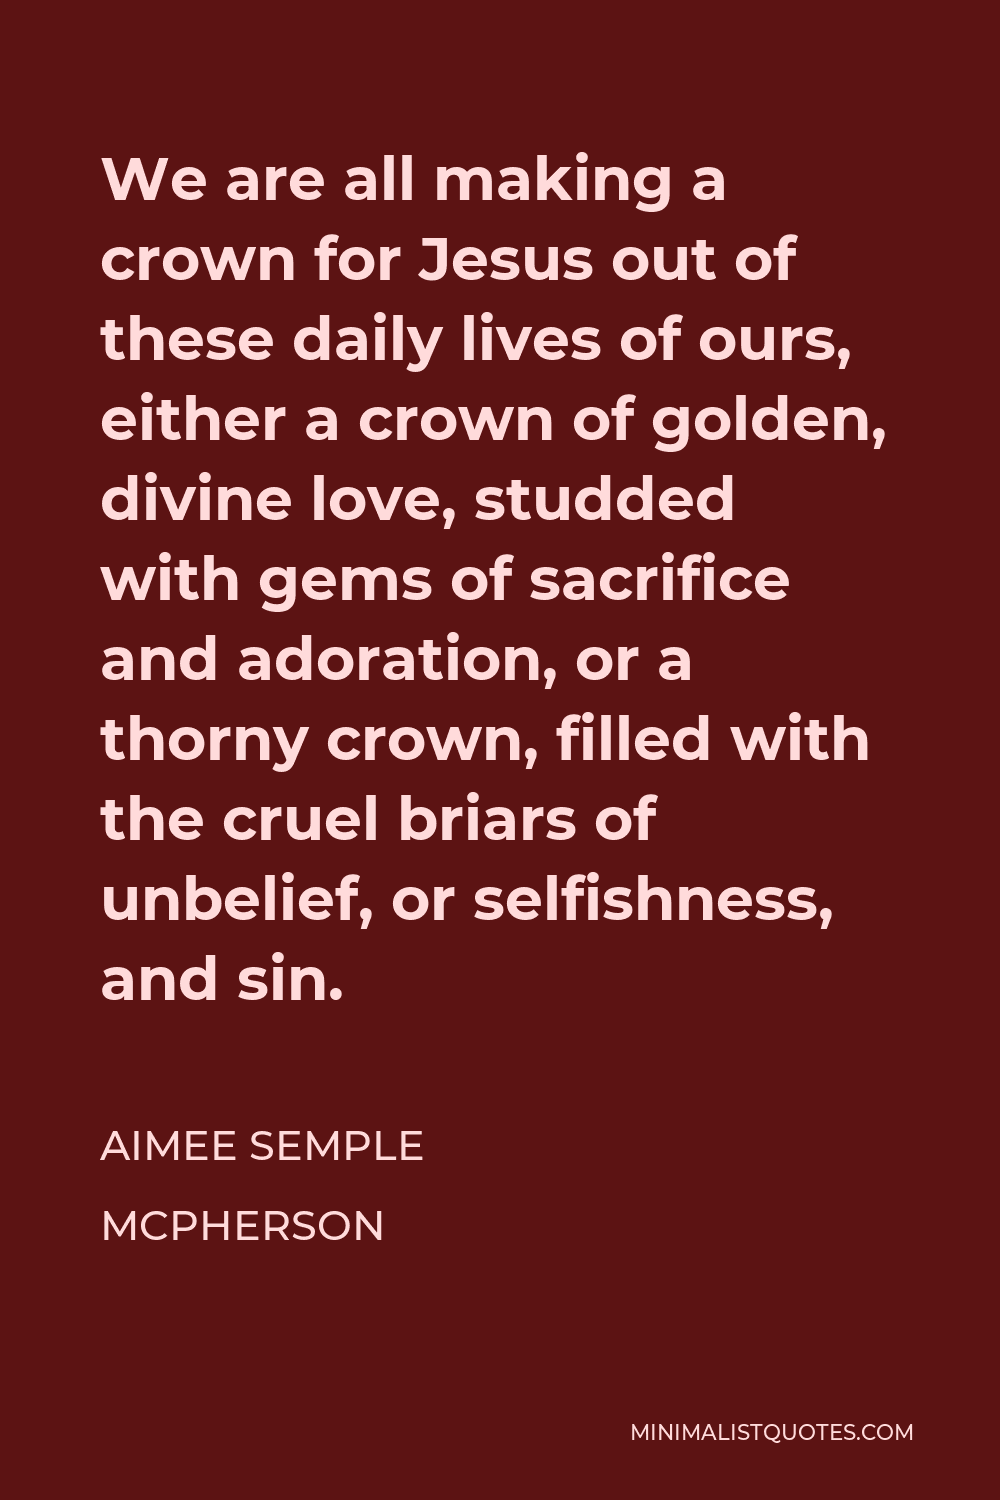 Aimee Semple McPherson Quote - We are all making a crown for Jesus out of these daily lives of ours, either a crown of golden, divine love, studded with gems of sacrifice and adoration, or a thorny crown, filled with the cruel briars of unbelief, or selfishness, and sin.